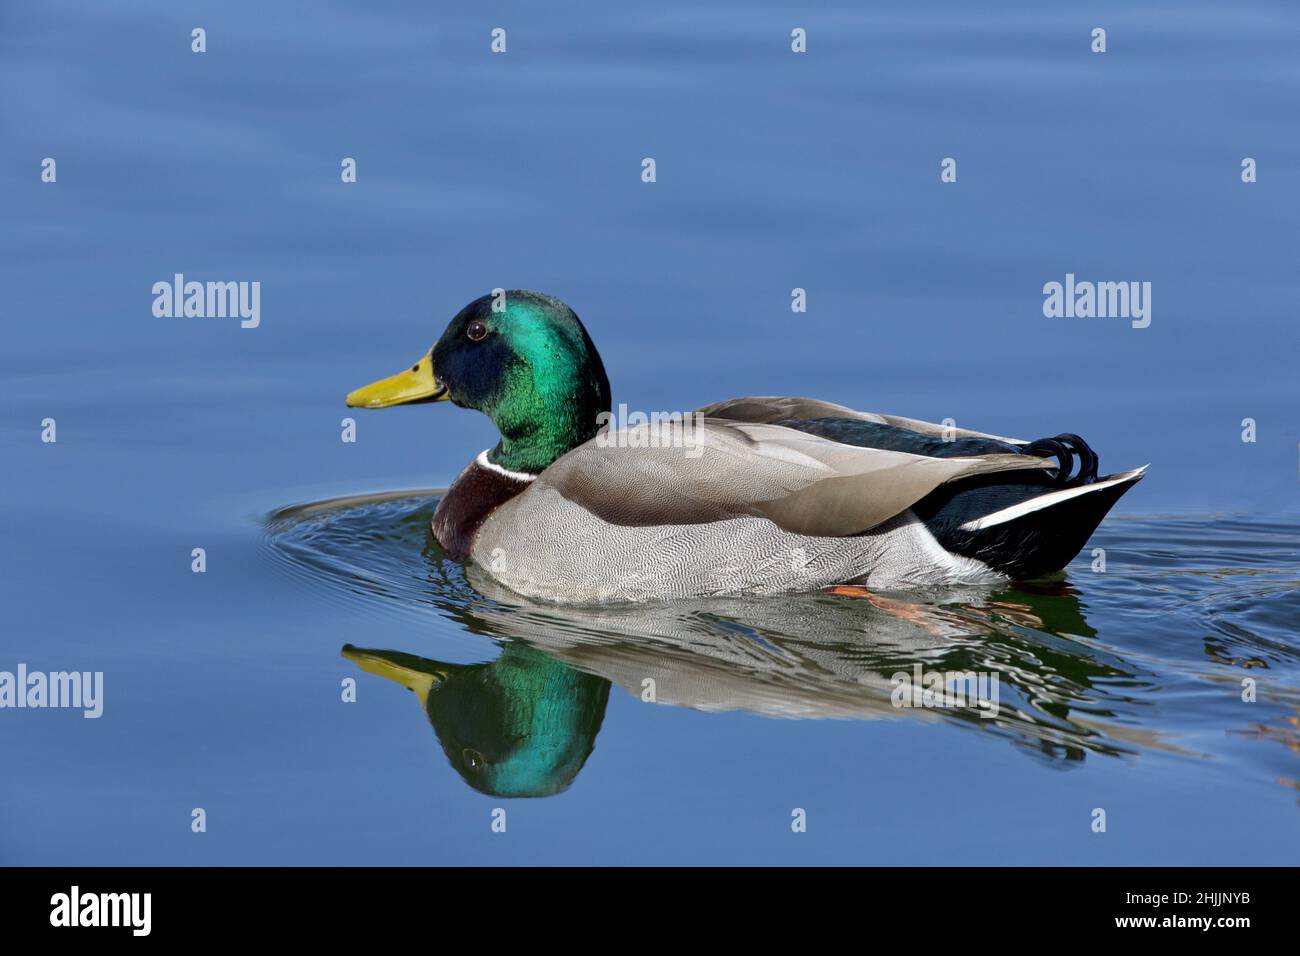 Emerald green head and yellow beak of male mallard duck reflected in tranquil blue water Stock Photo